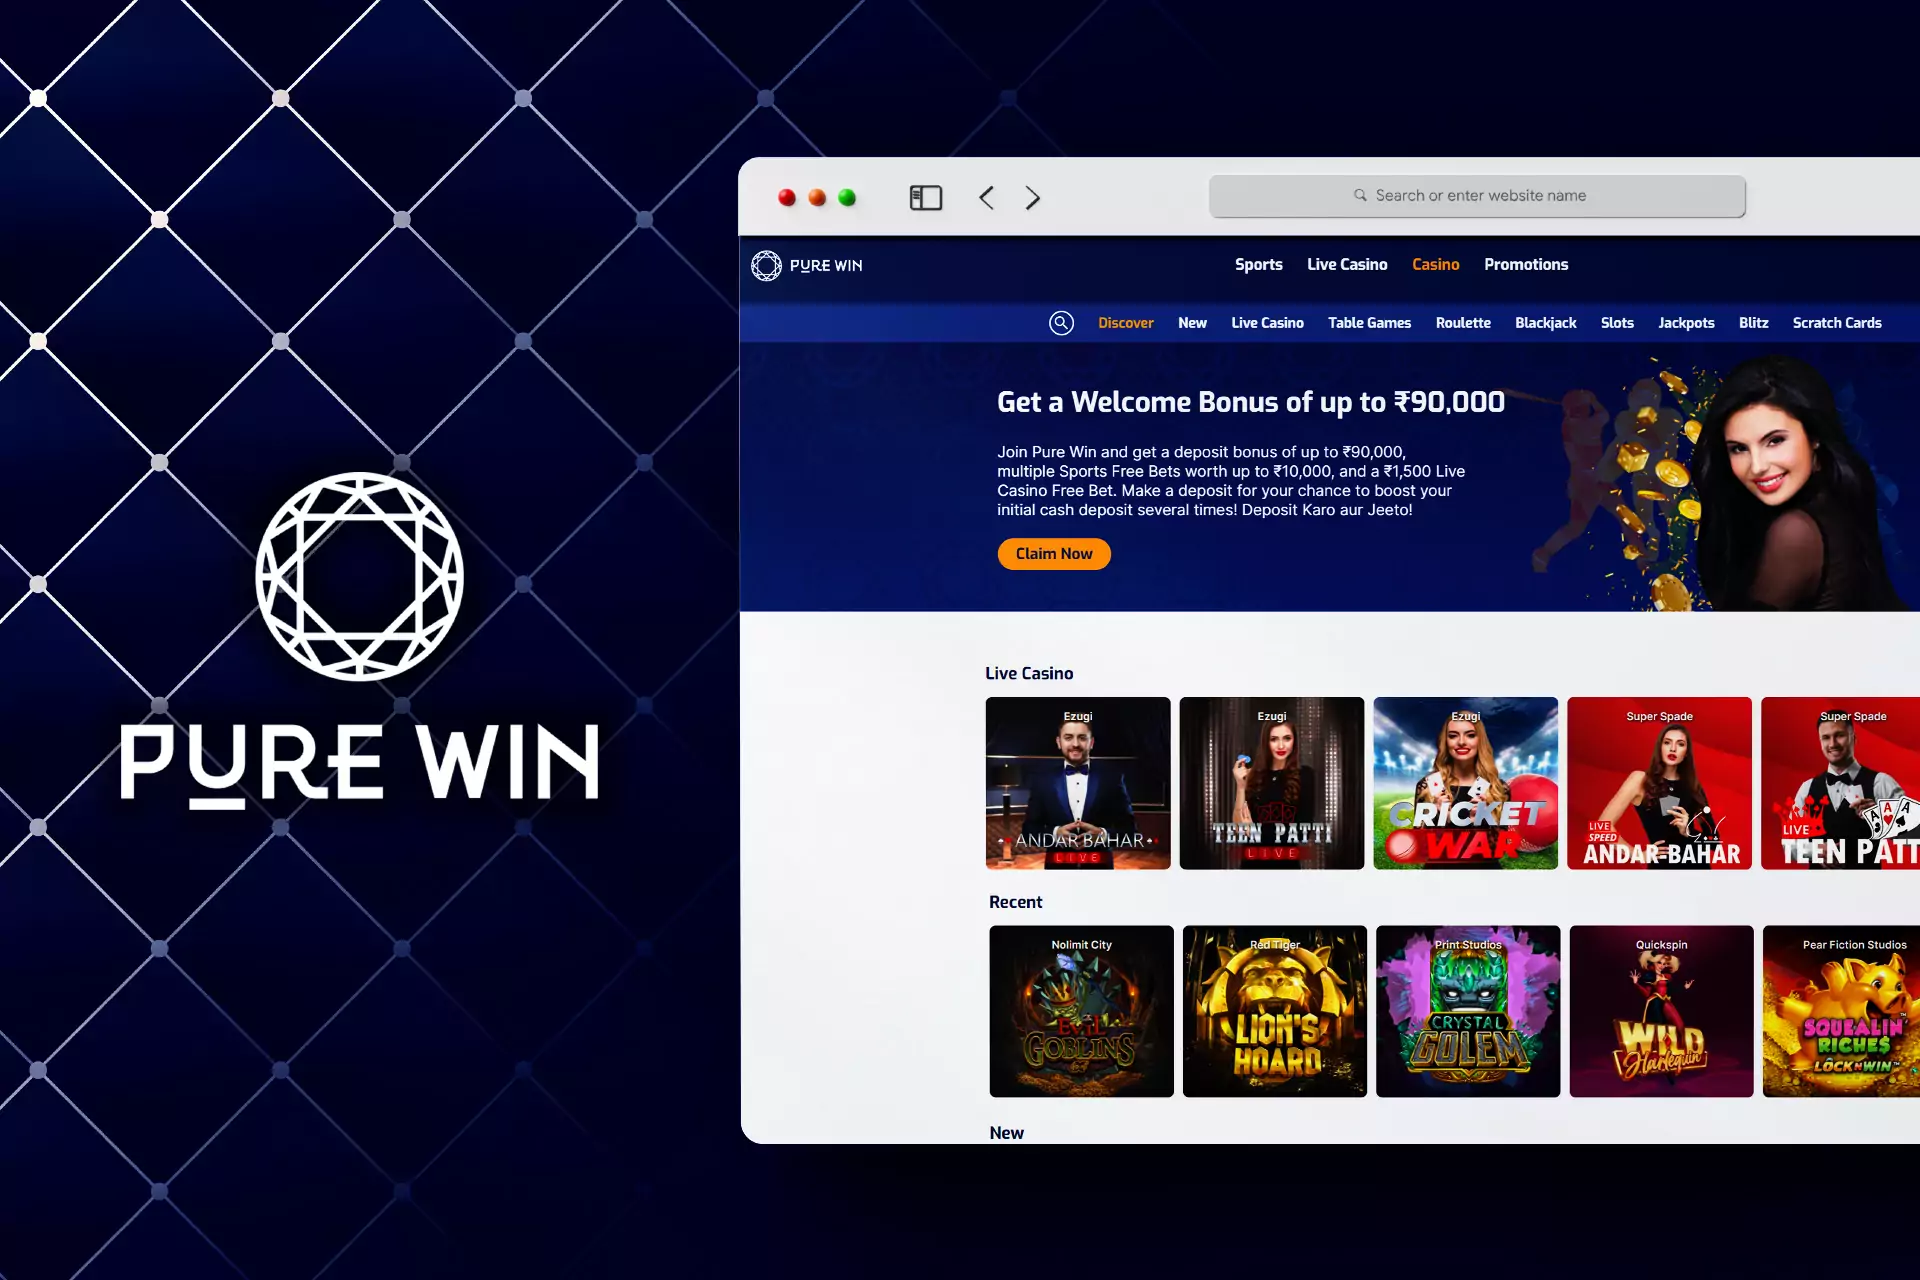 The users of Pure Win can play casino games on the website and in the apps.